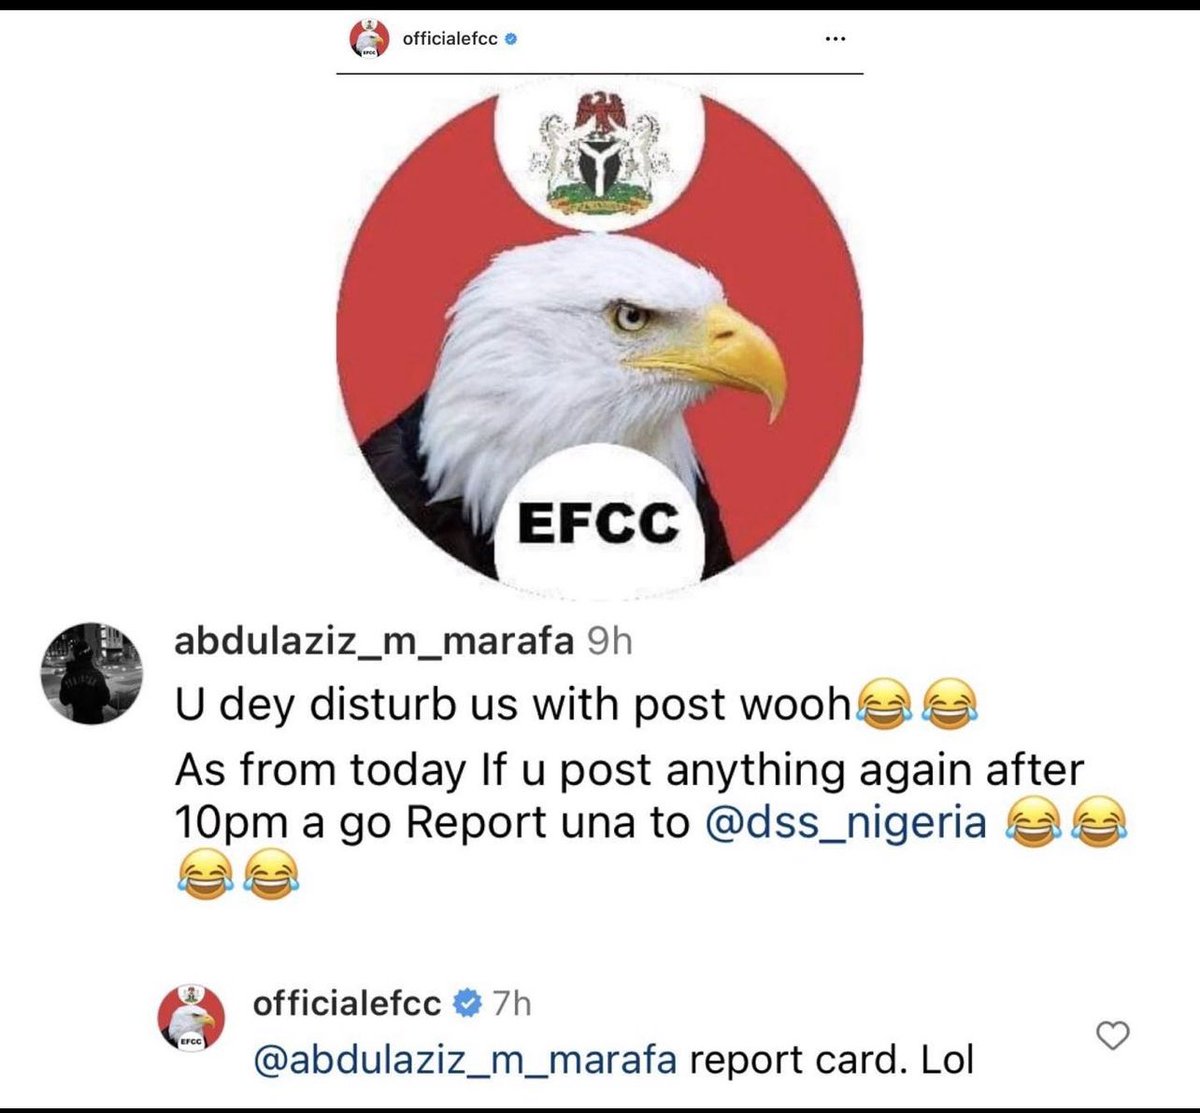 Between EFCC and a Fan